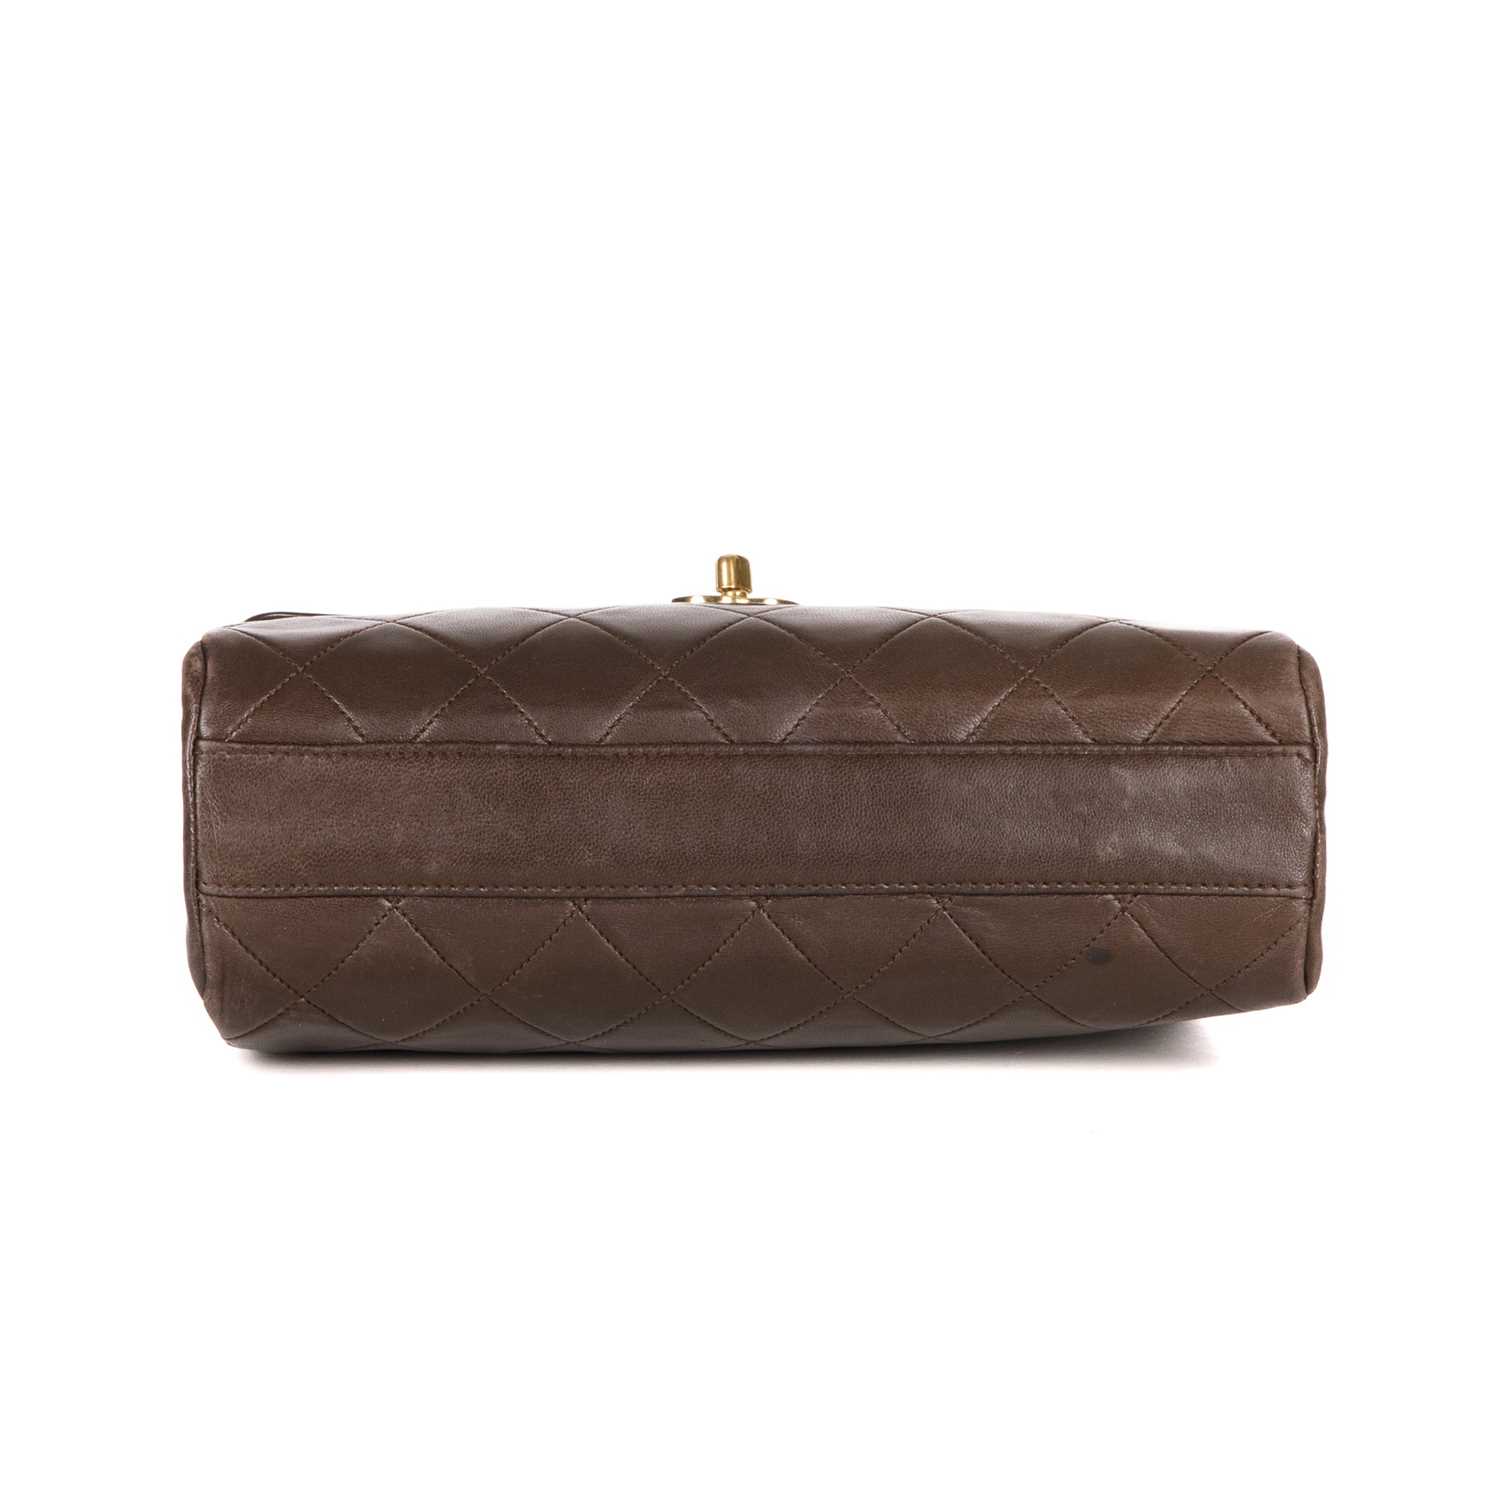 Chanel, a vintage Single Flap handbag, designed with a diamond quilted brown lambskin leather - Image 4 of 4